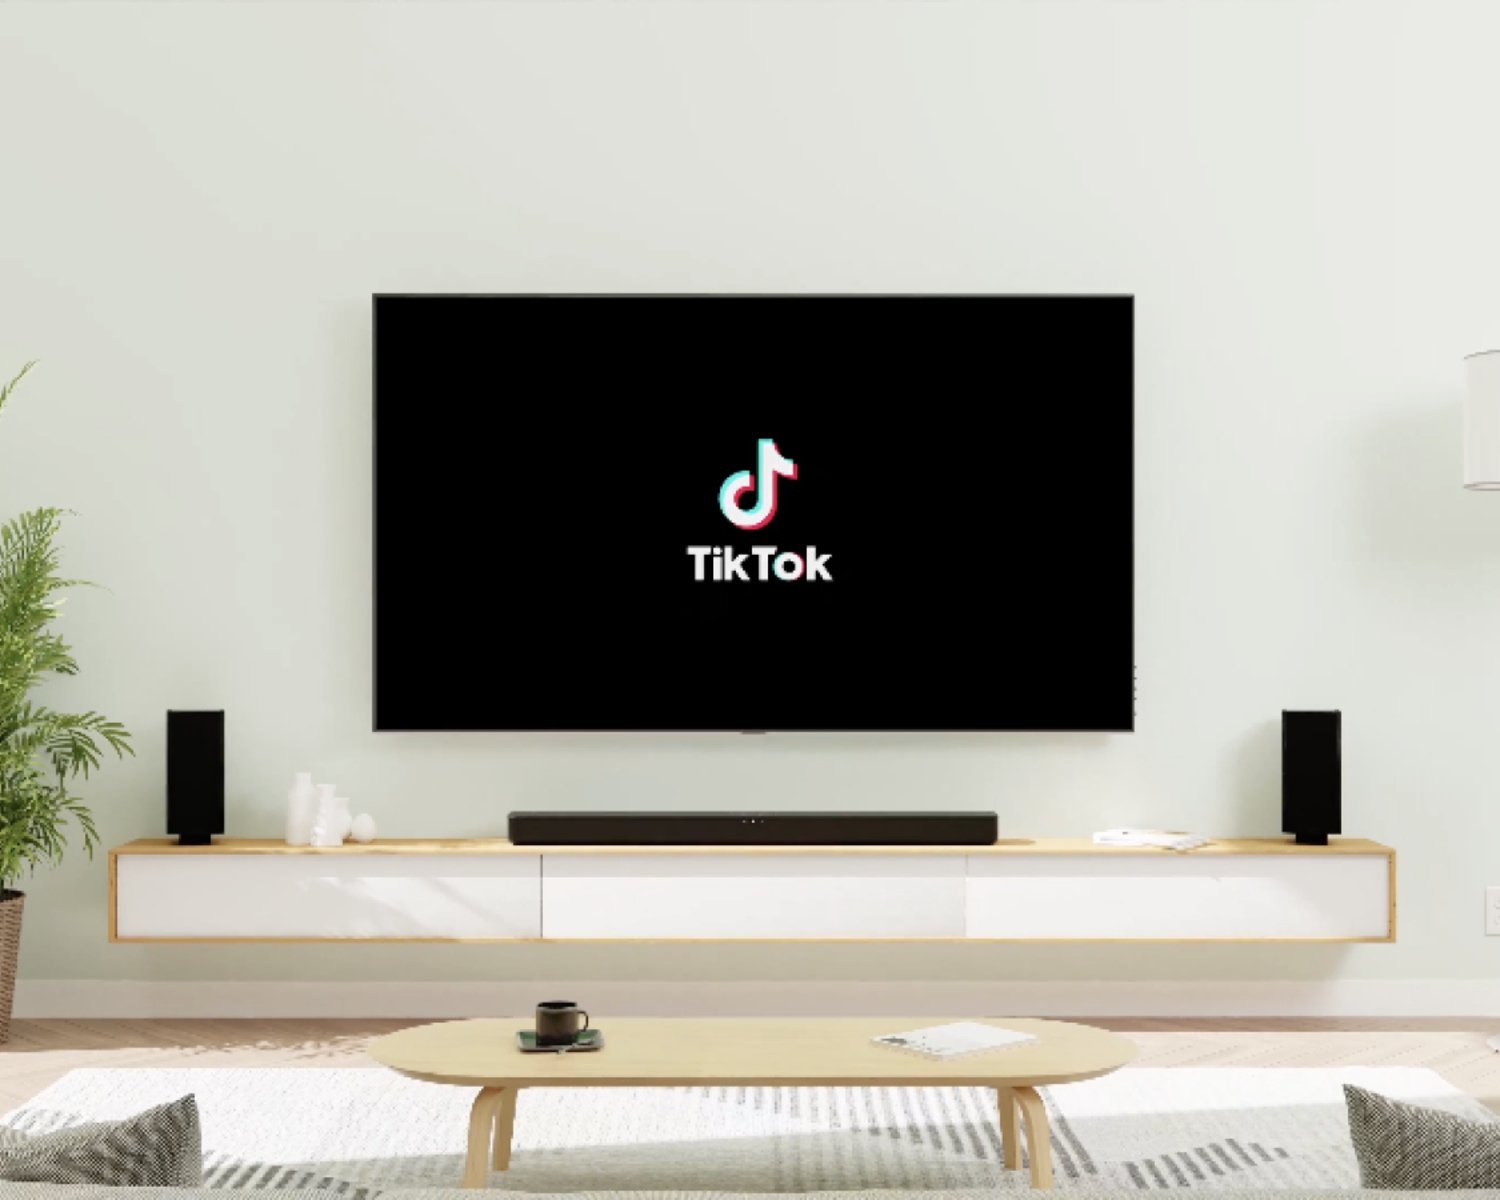 How To Watch TikTok On Your TV